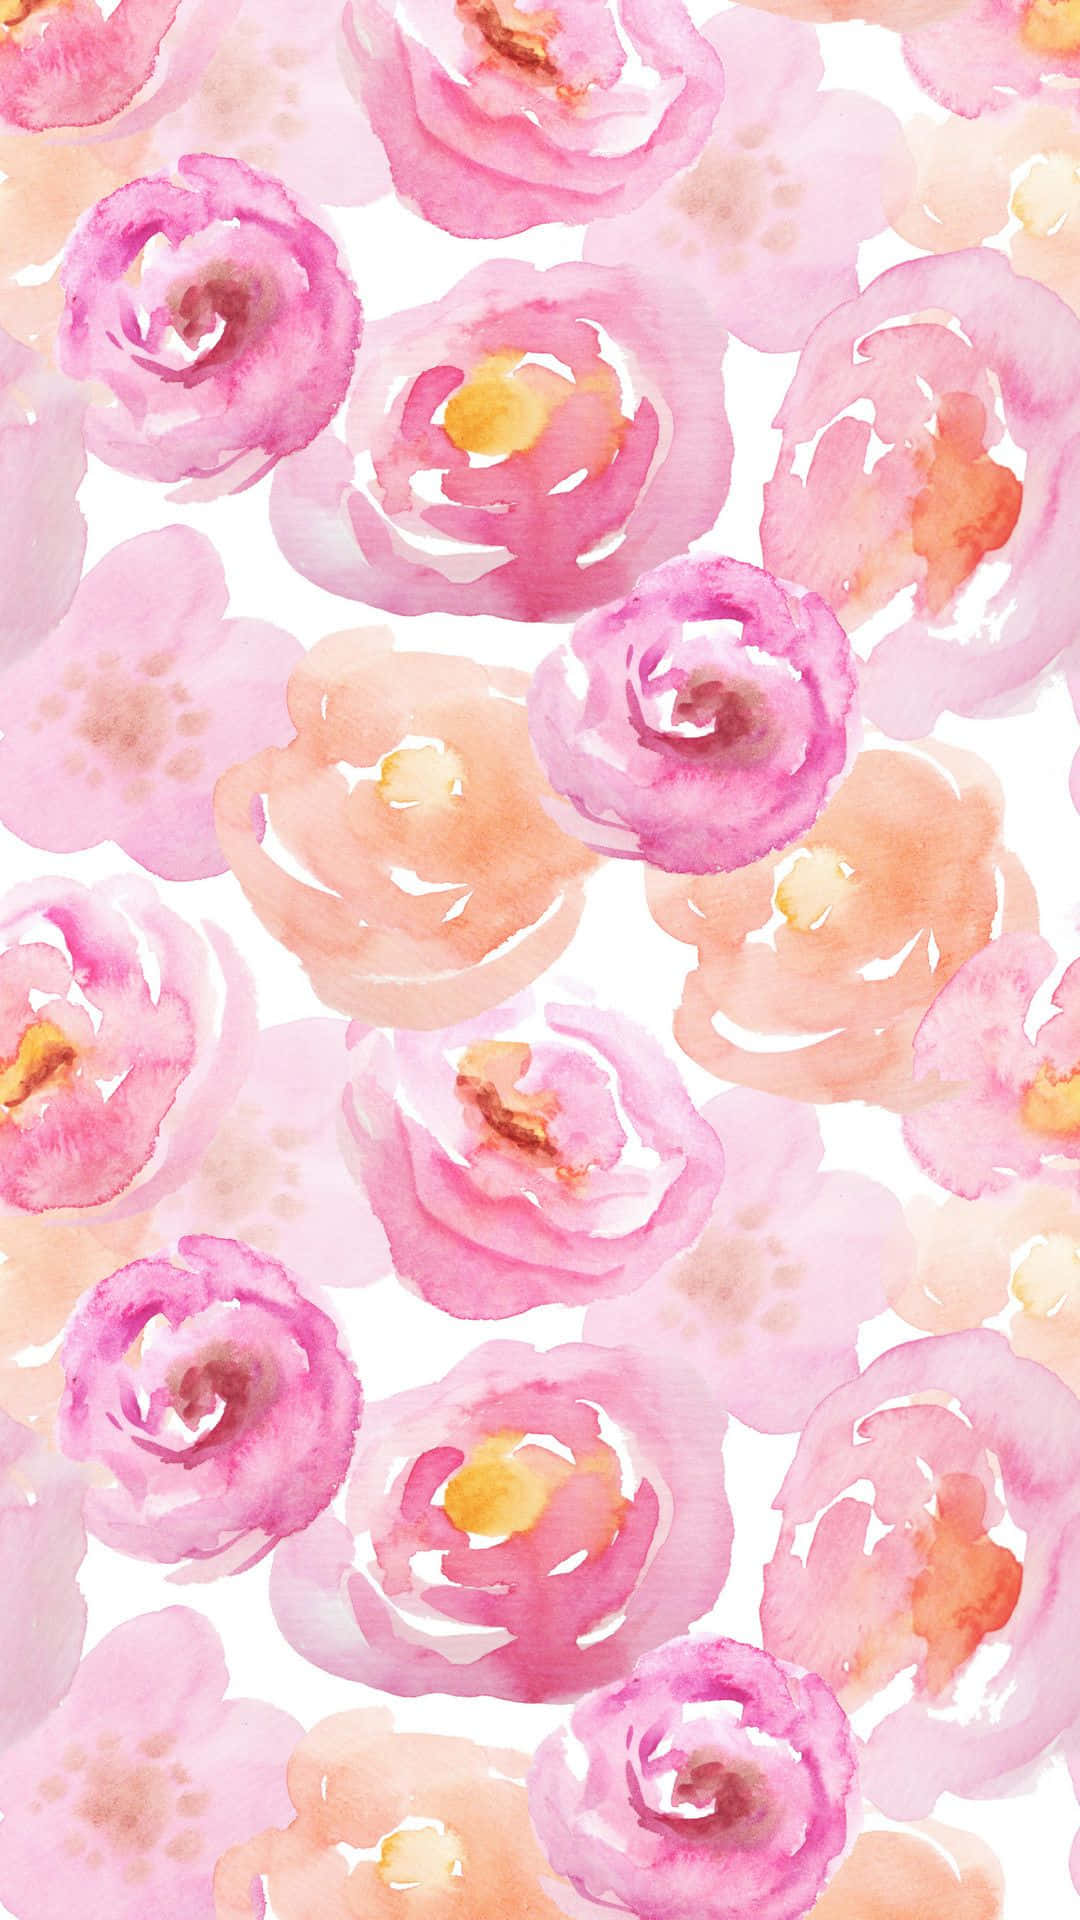 Celebrate a blooming spring with this stunning pink floral pattern. Wallpaper